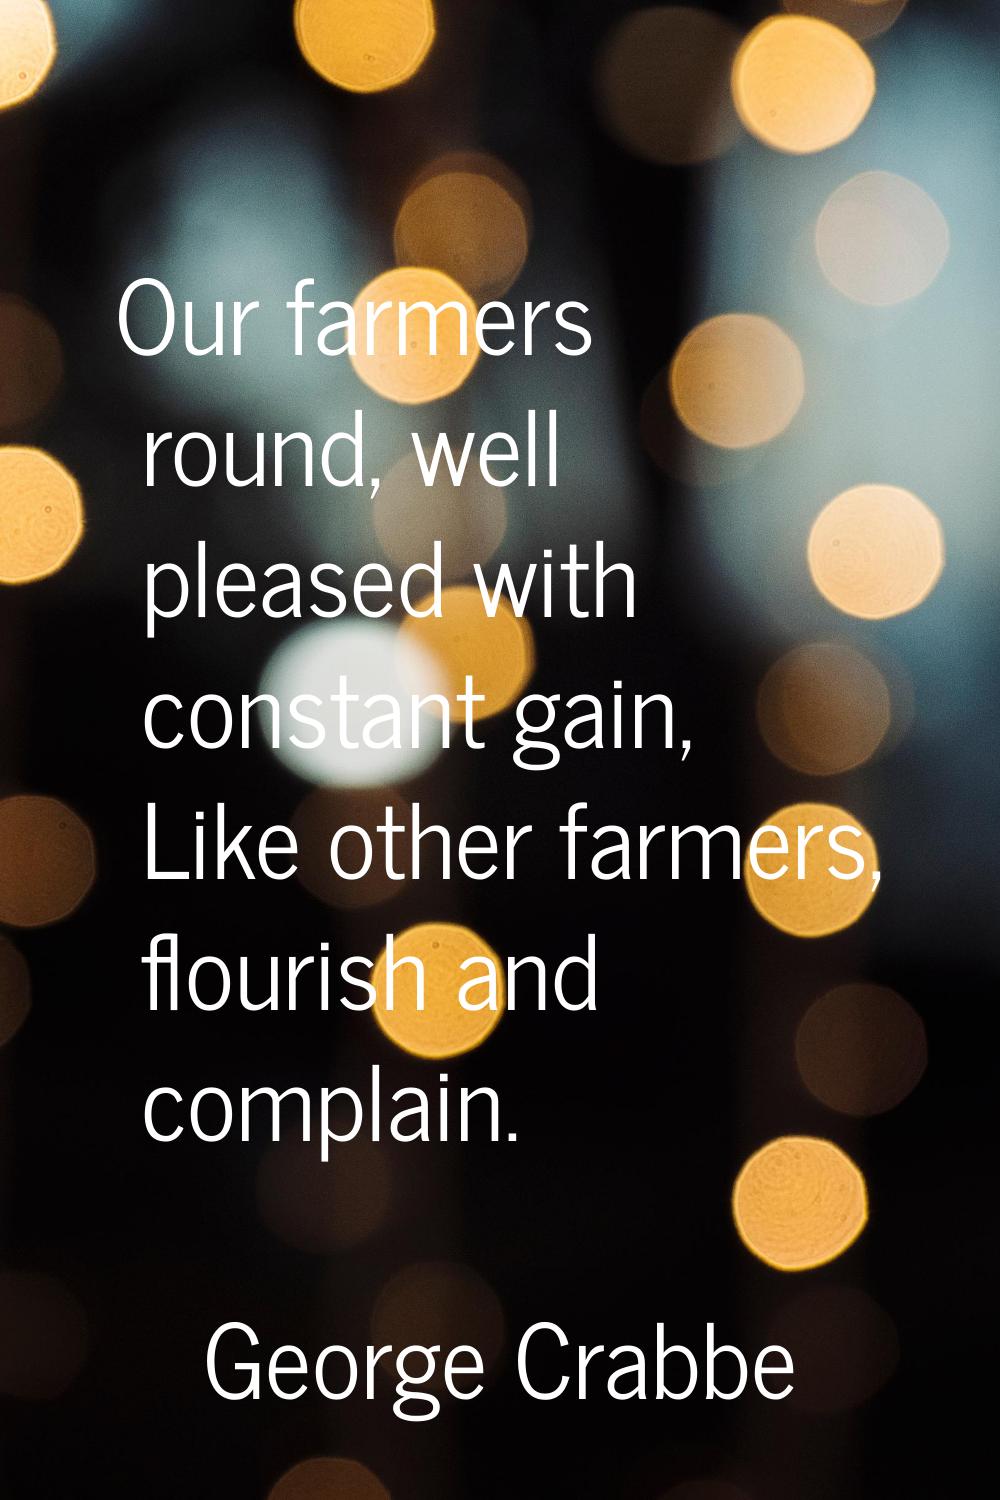 Our farmers round, well pleased with constant gain, Like other farmers, flourish and complain.